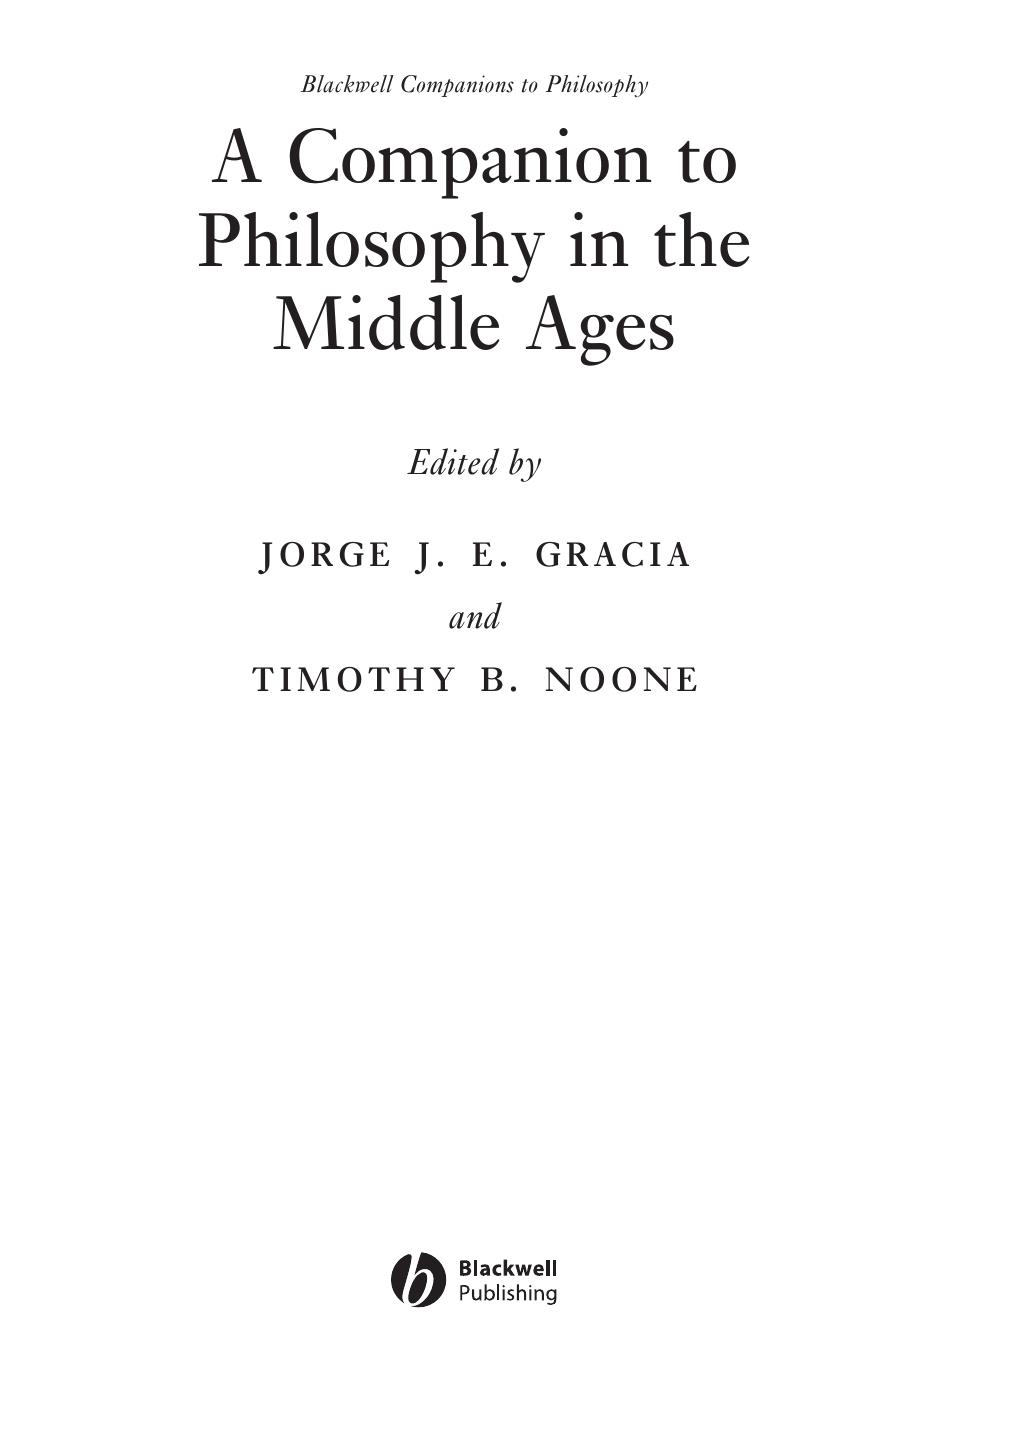 A companion to philosophy in the middle ages by edited by Jorge J. E. Gracia & Timothy B. Noone